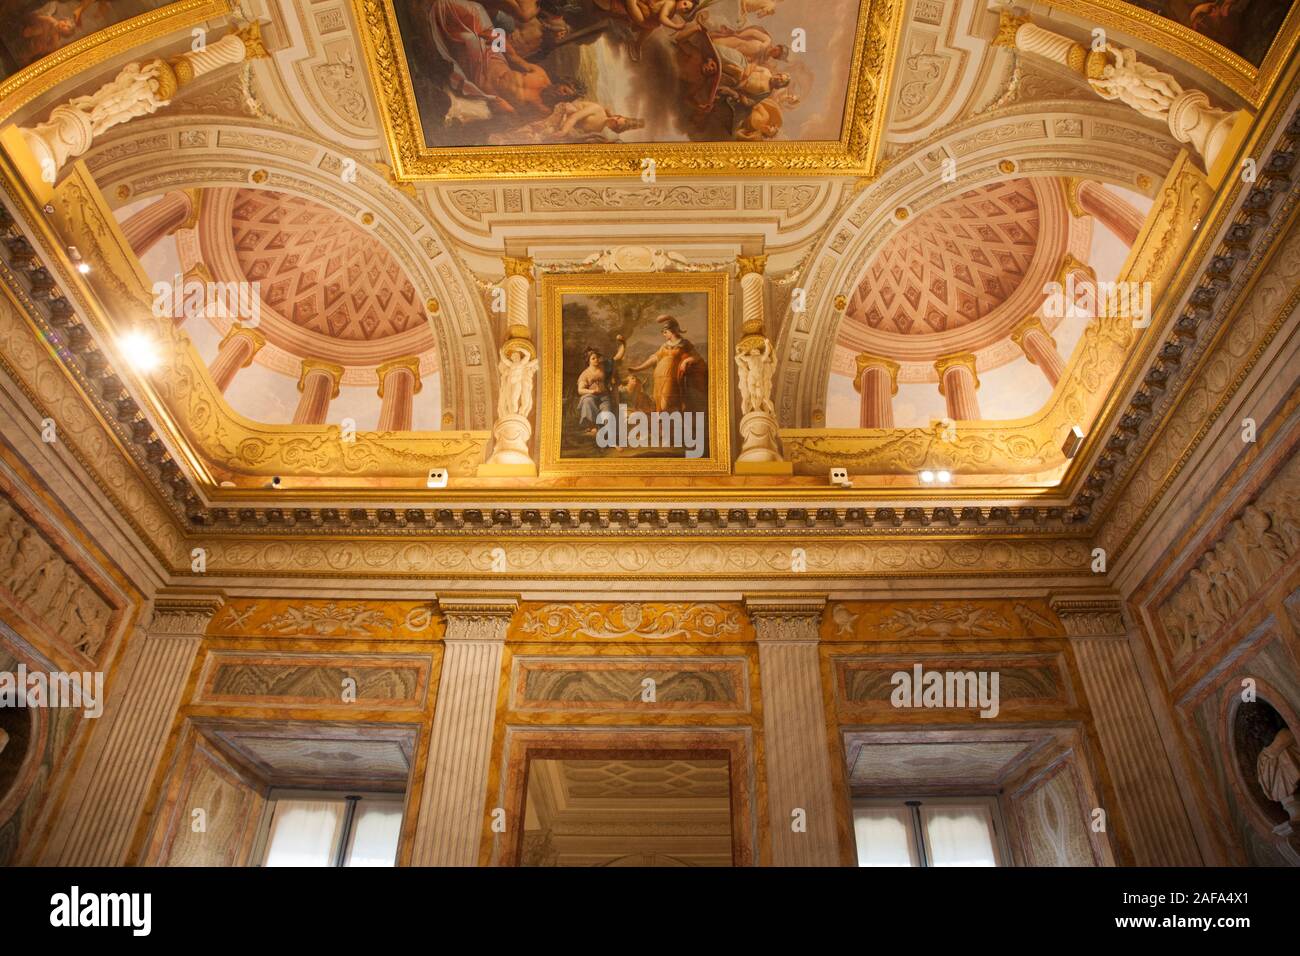 Painted ceiling frescos inside the Galleria Borghese (Borghese Gallery), Rome Stock Photo